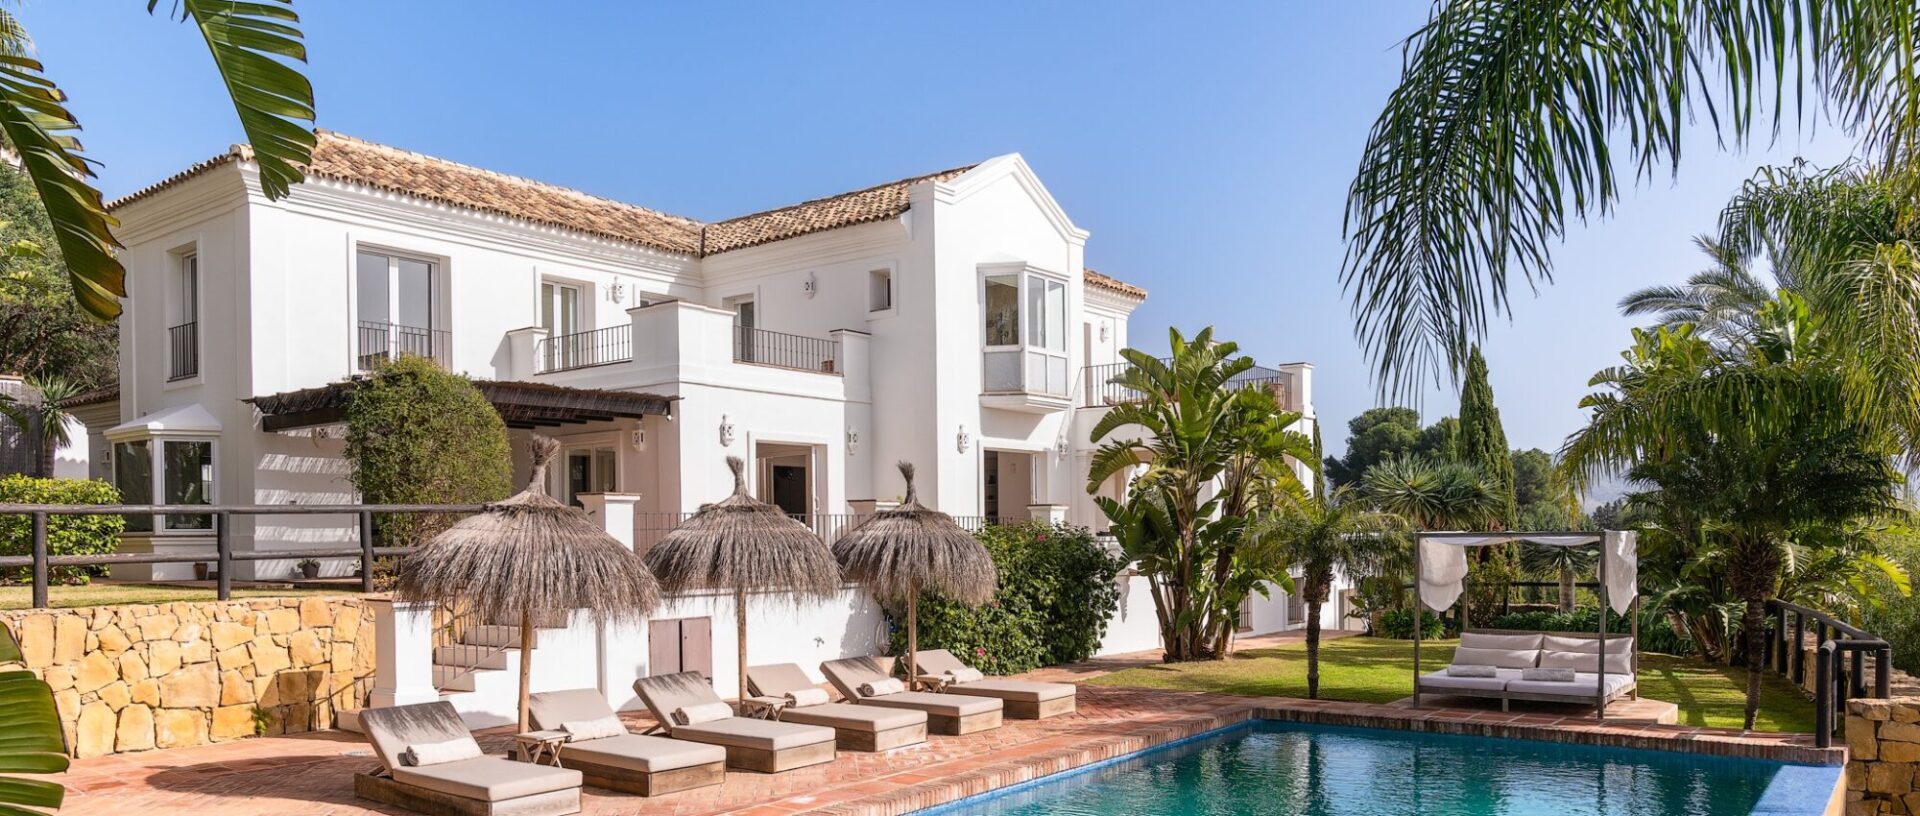 Andalusian style village with impressive panoramic views